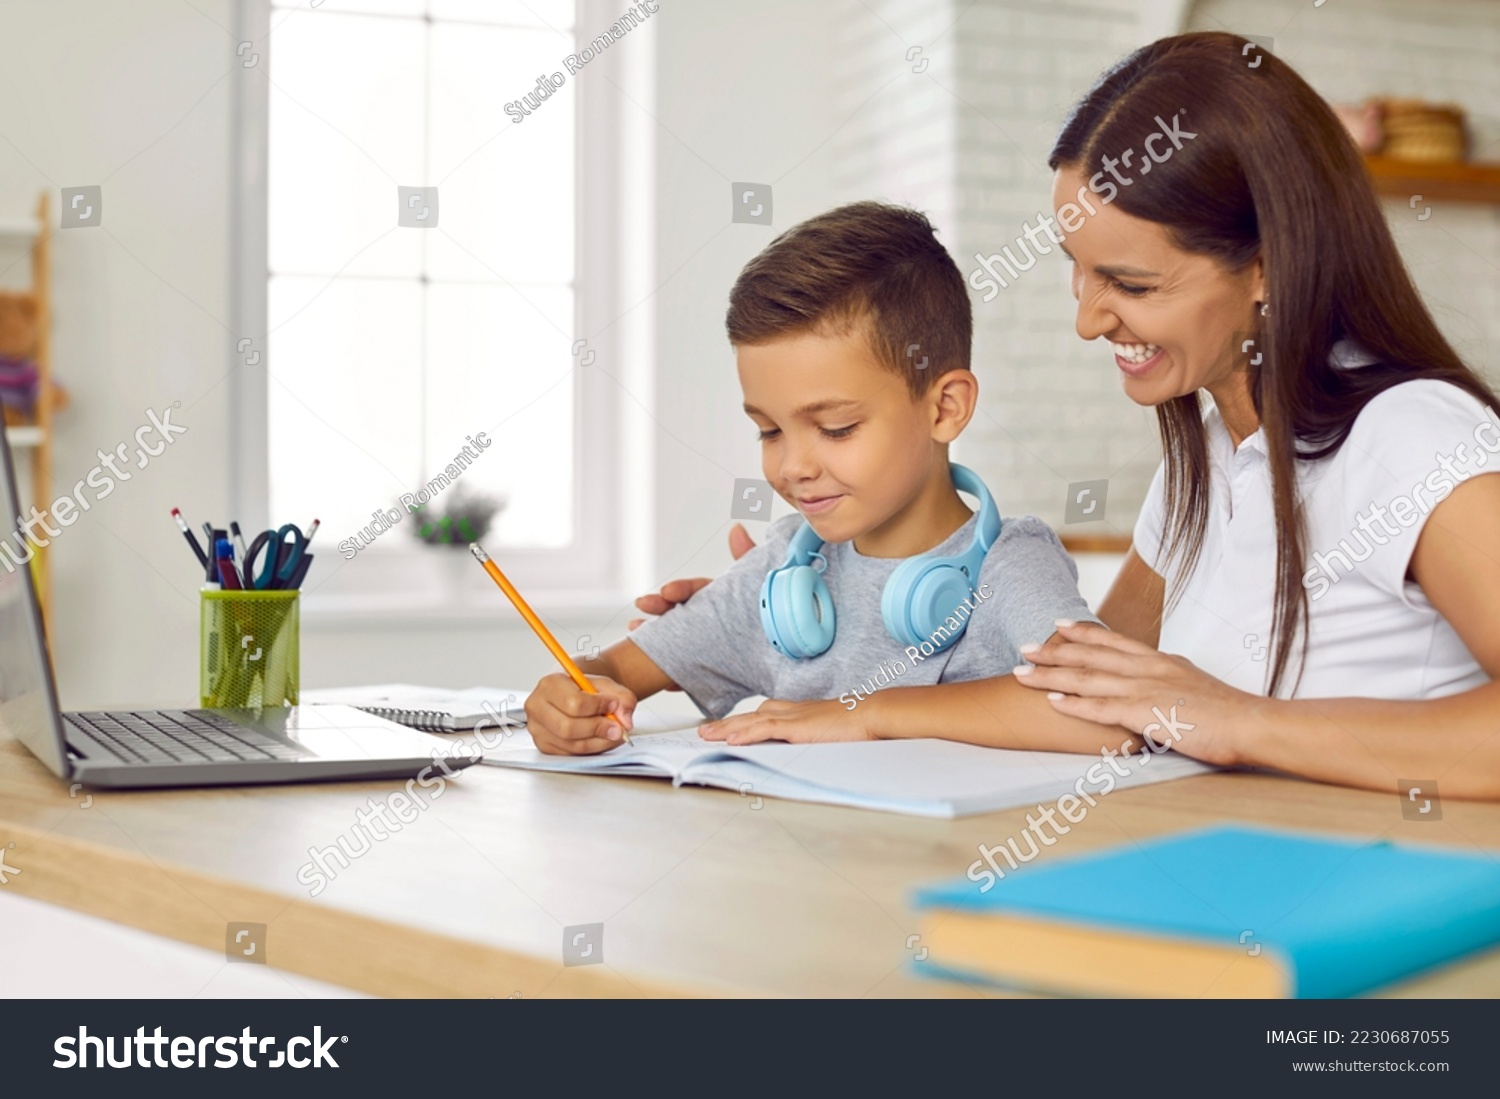 Cheerful family doing school assignment at home. Happy young mother sitting at desk together with her son, helping him with homework, smiling and supporting him. Children, education concept #2230687055